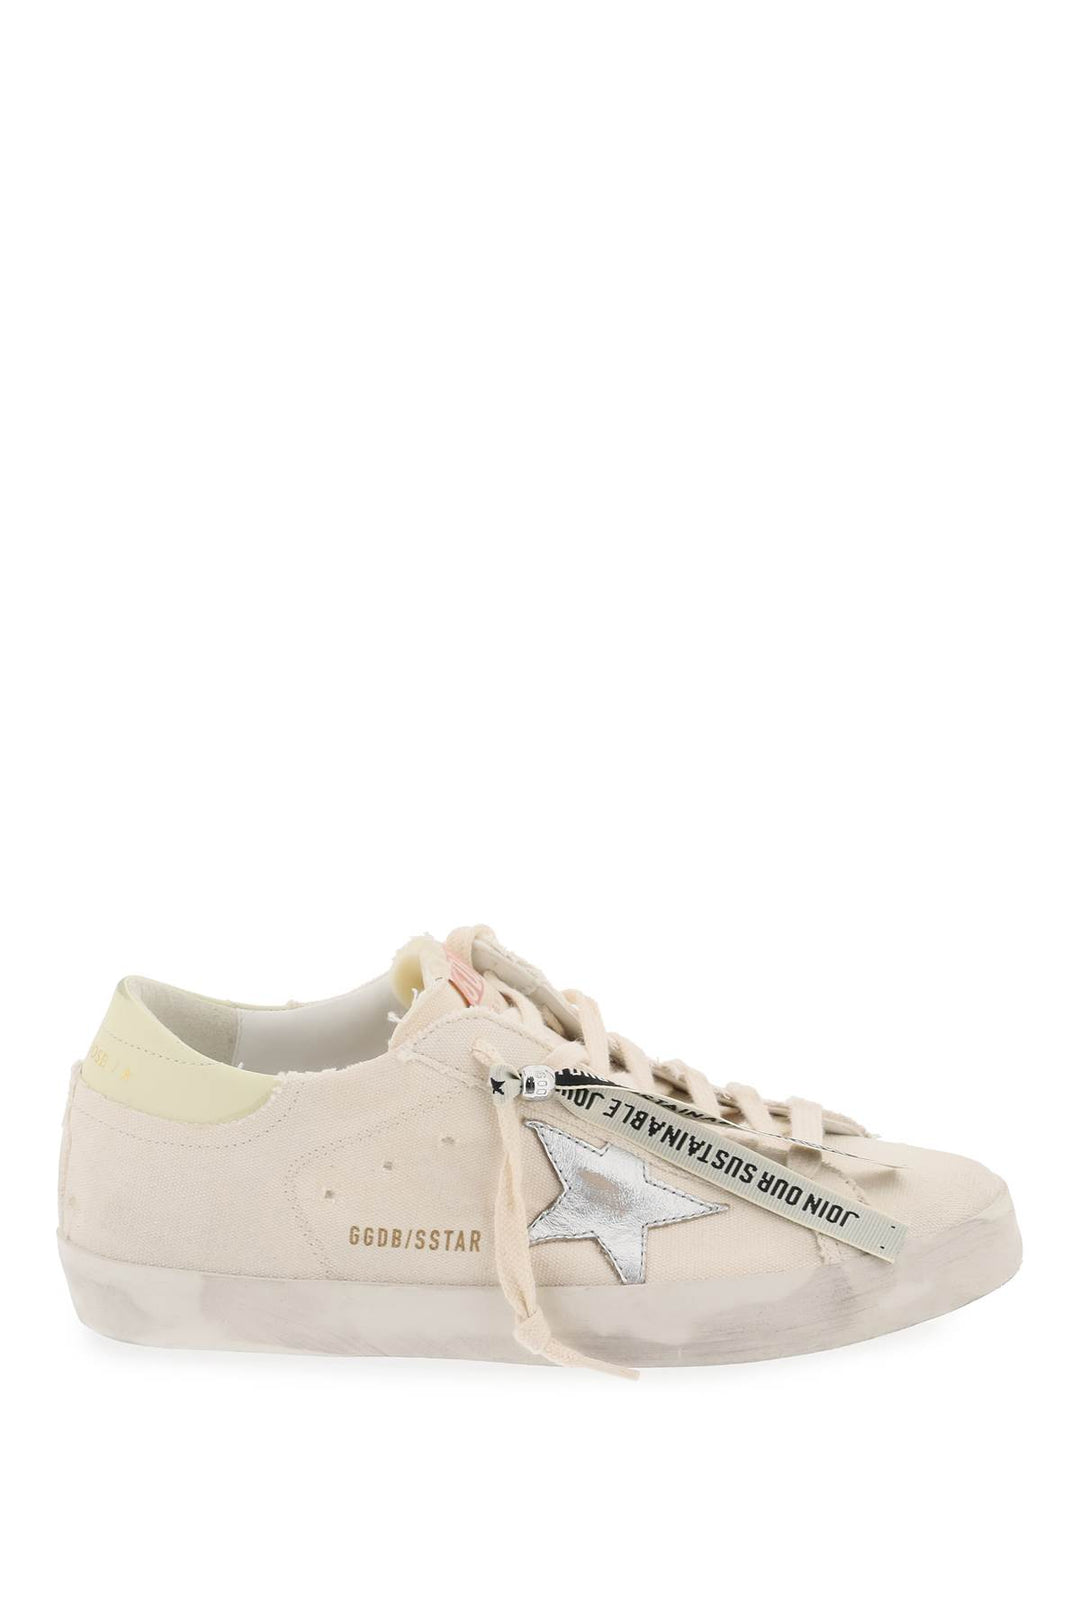 Golden Goose Super Star Canvas And Leather Sneakers   Bianco